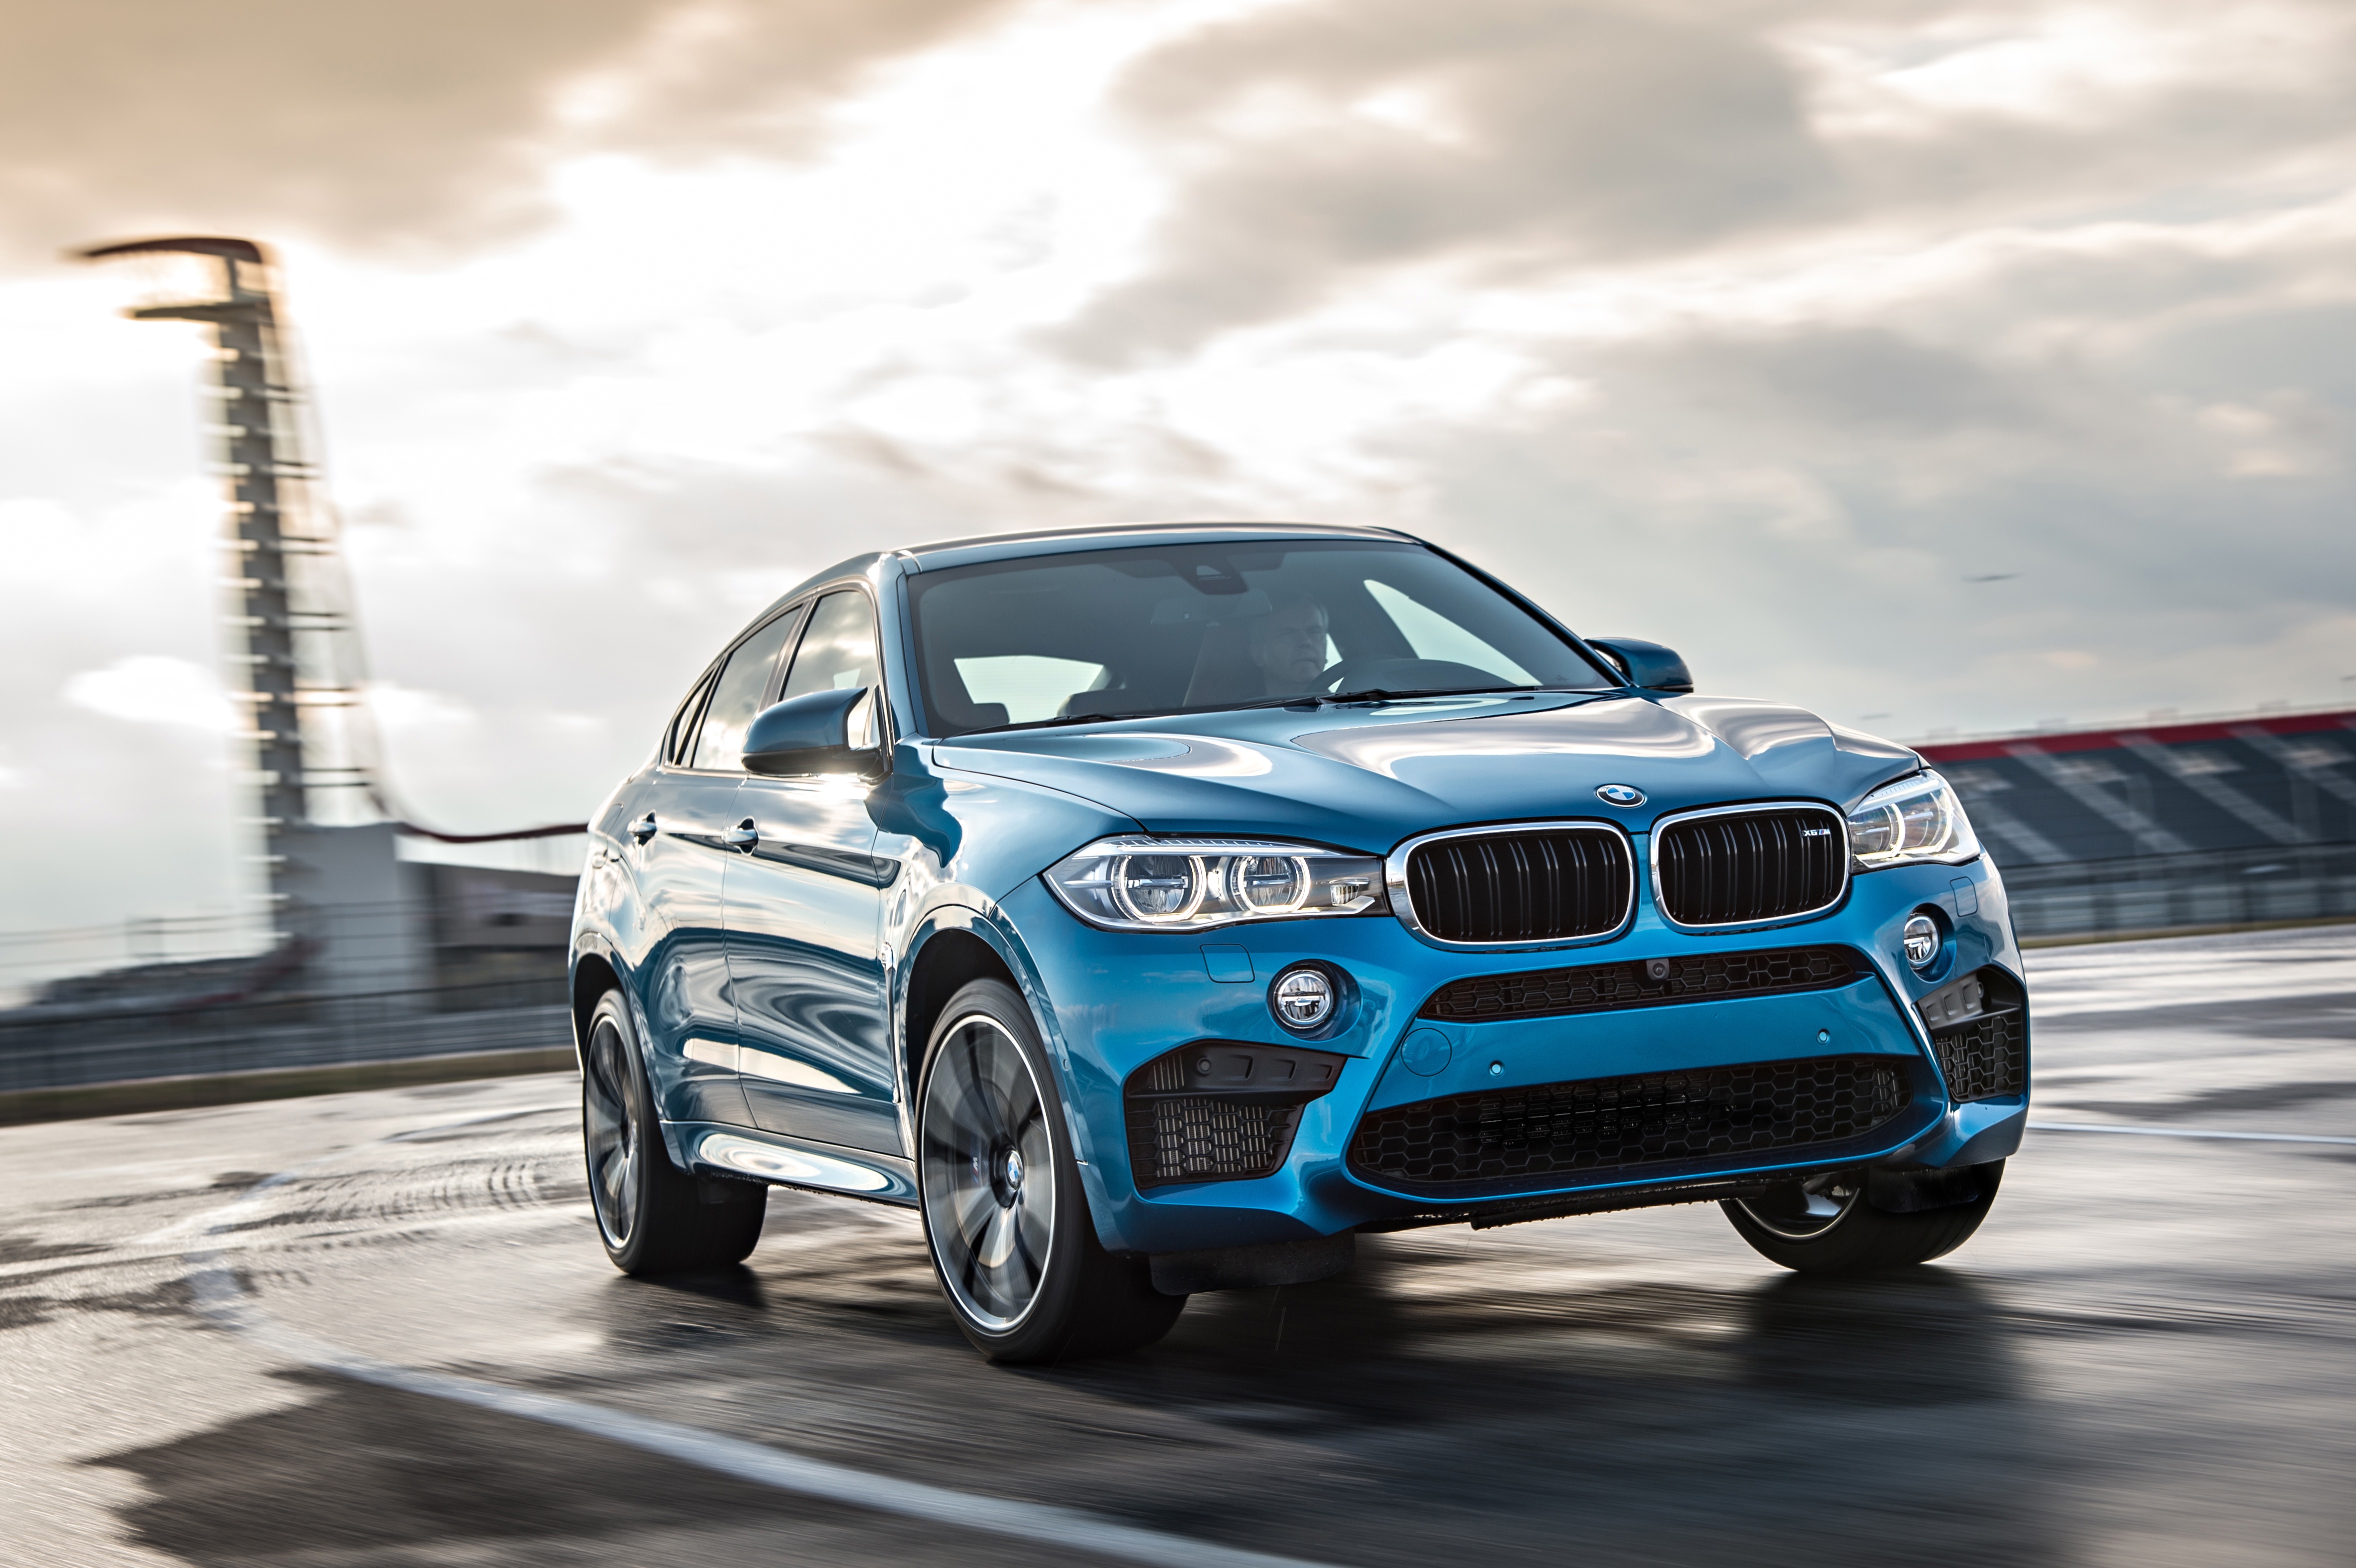 p90172859_highres_the-new-bmw-x6-m-on-.jpg